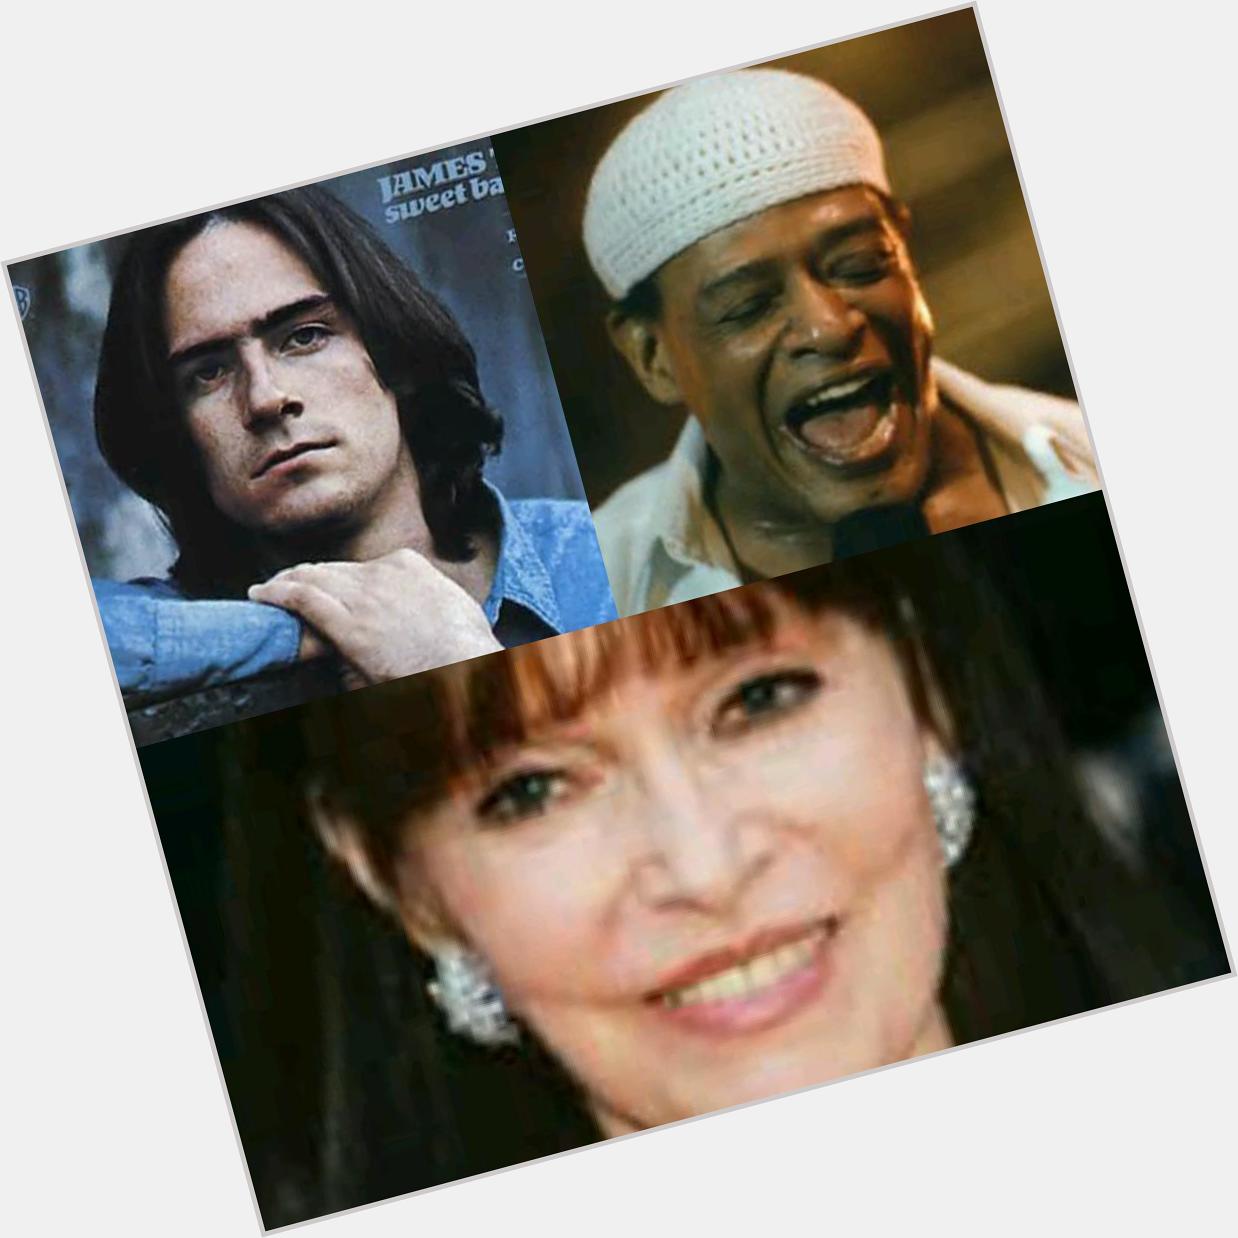 Happy Birthday to 3 faves  & Barbara Feldon
Thanks 4 sharing your awesome talents with us. 